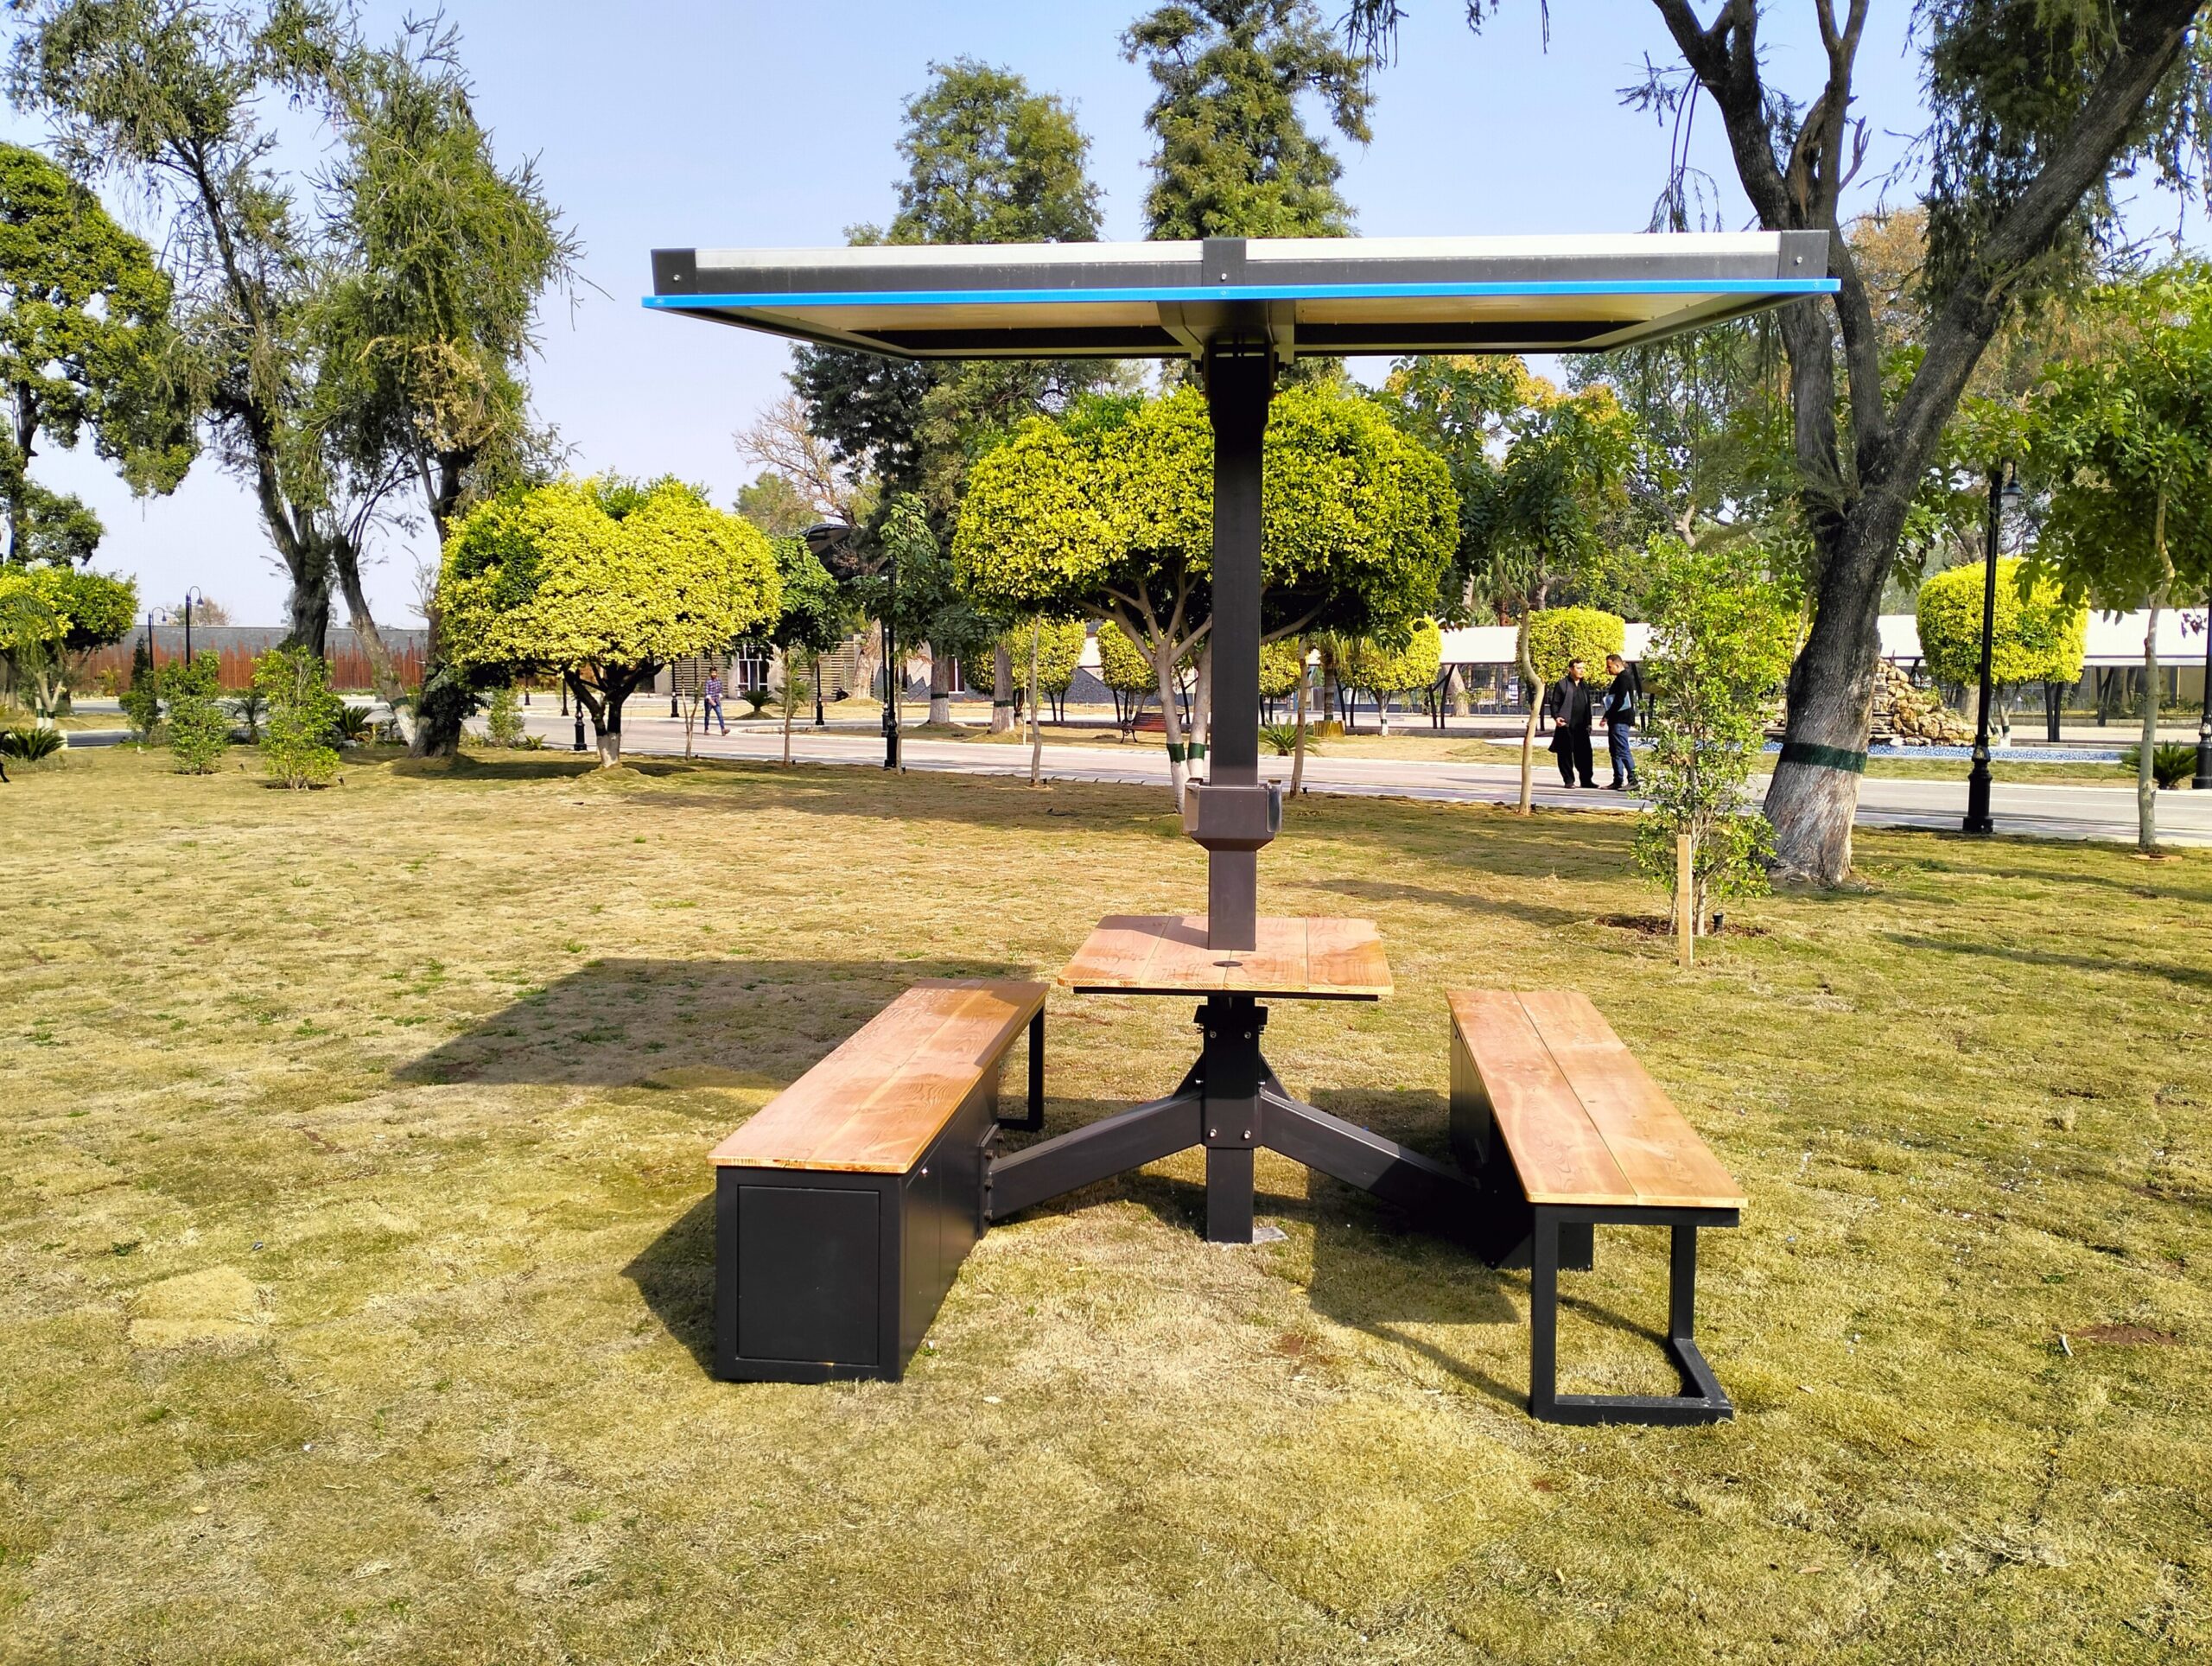 a beautiful solar umbrella installed for gadgets charging and outdoor sitting